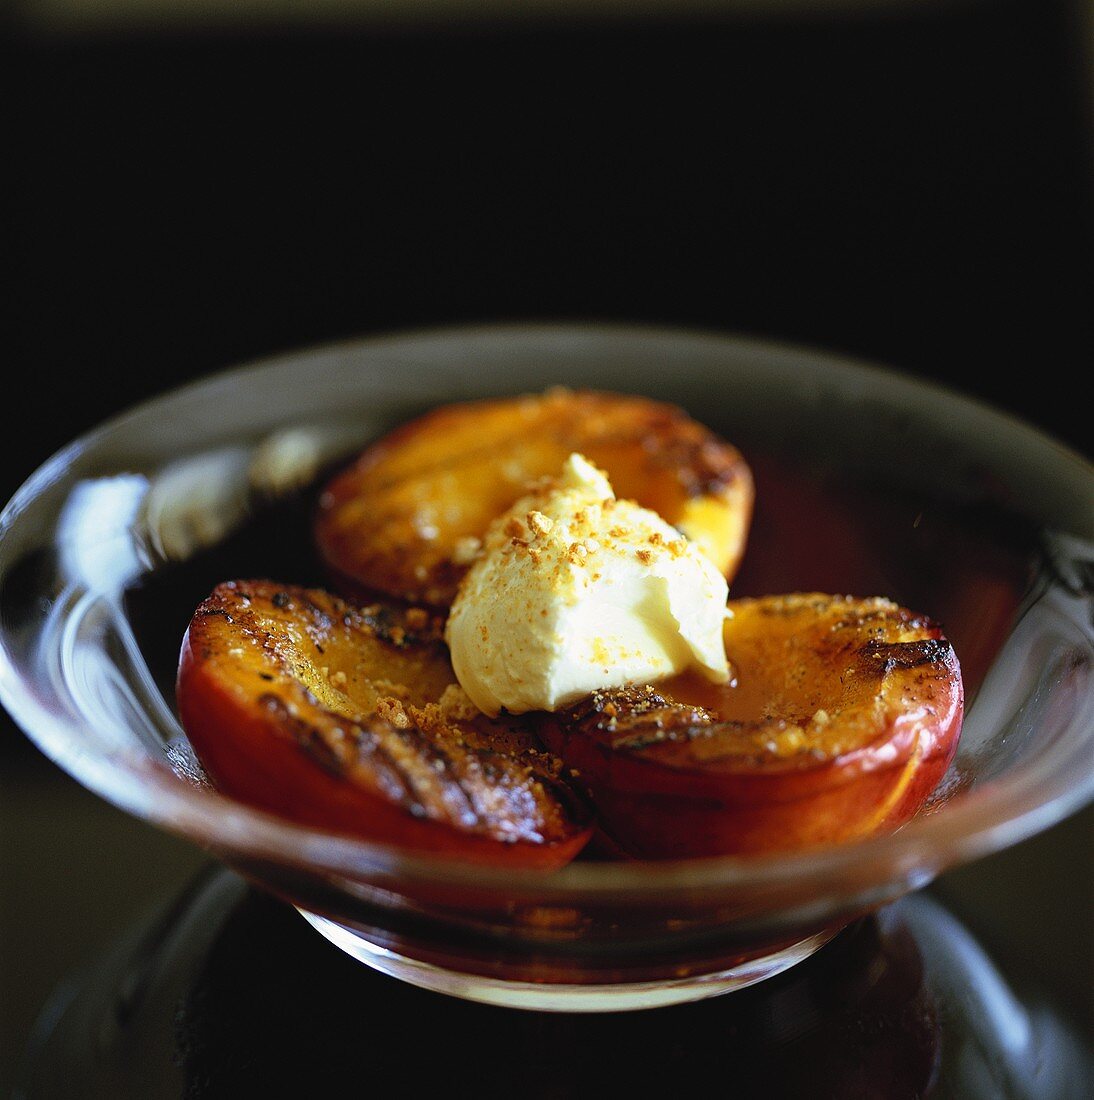 Grilled nectarines with cream